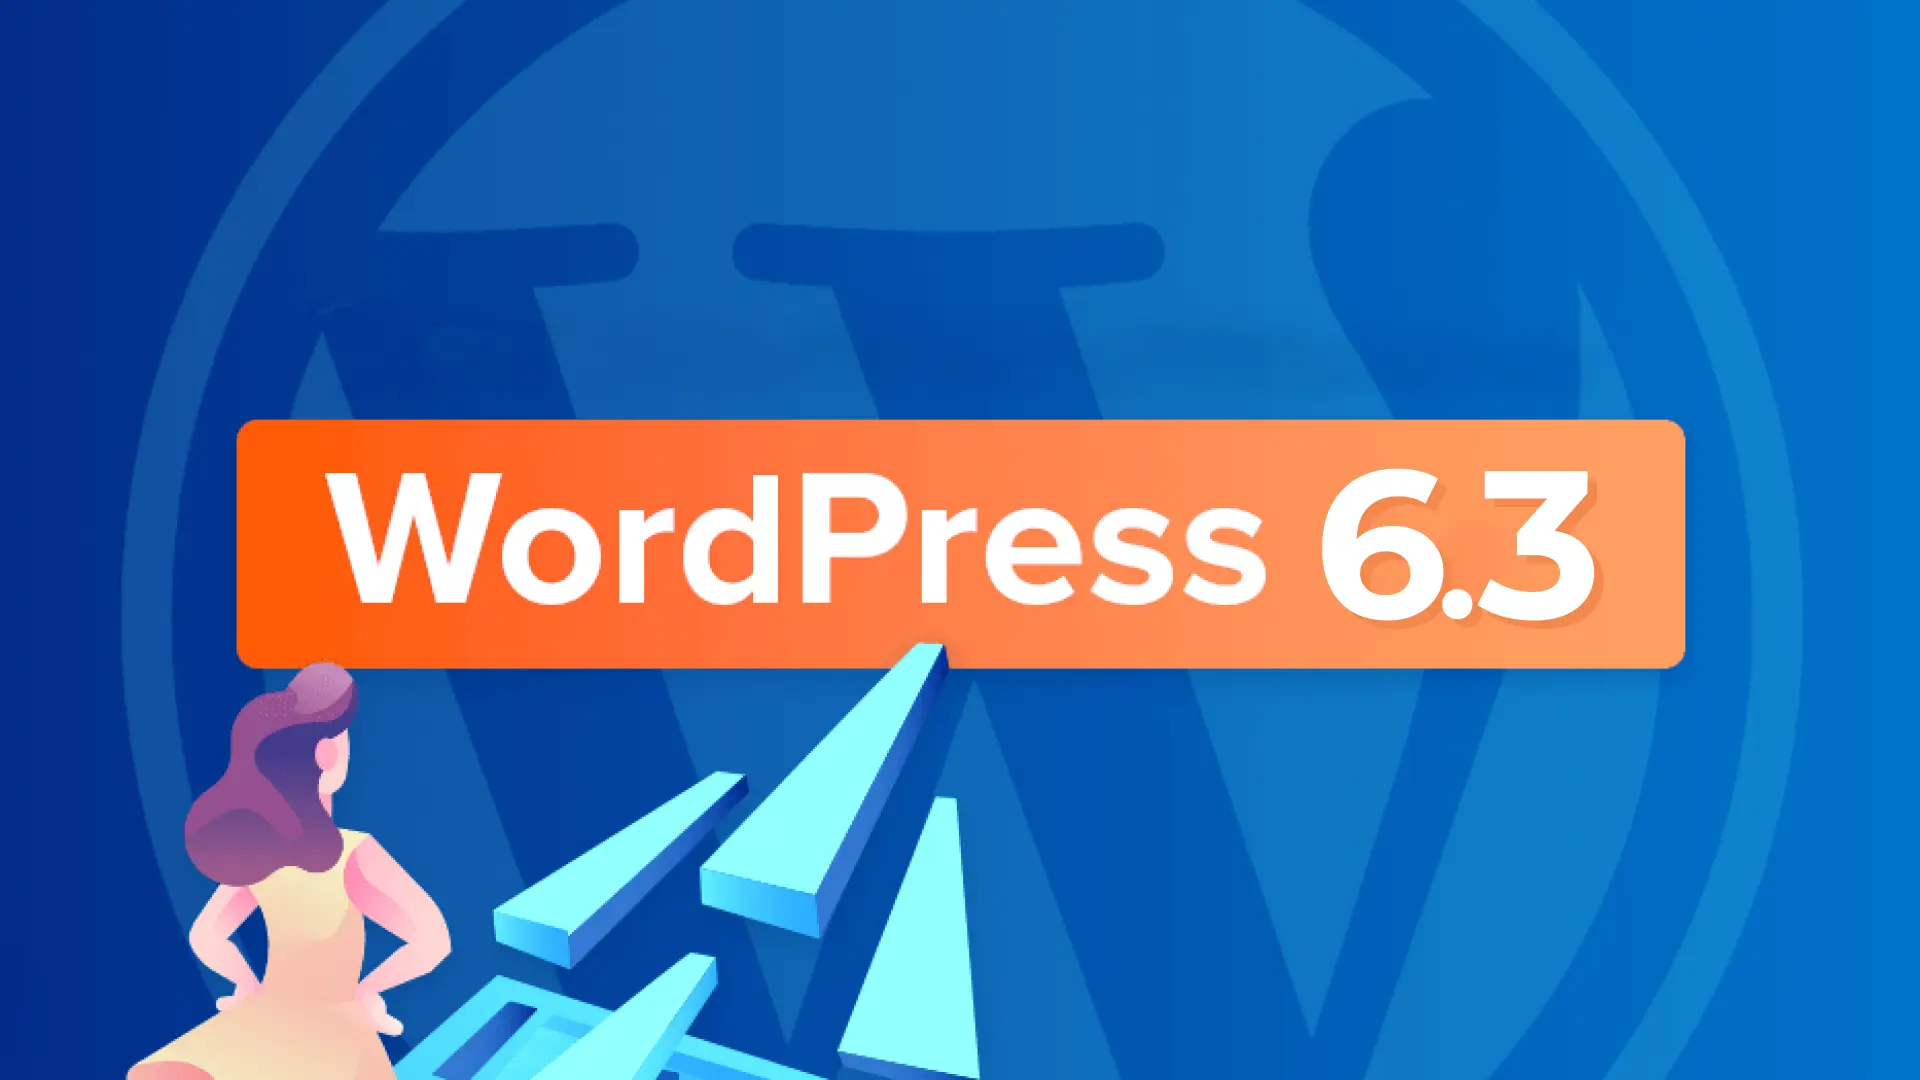 WordPress 6.3 Update: Enhancements in LCP & SEO Performance, & more